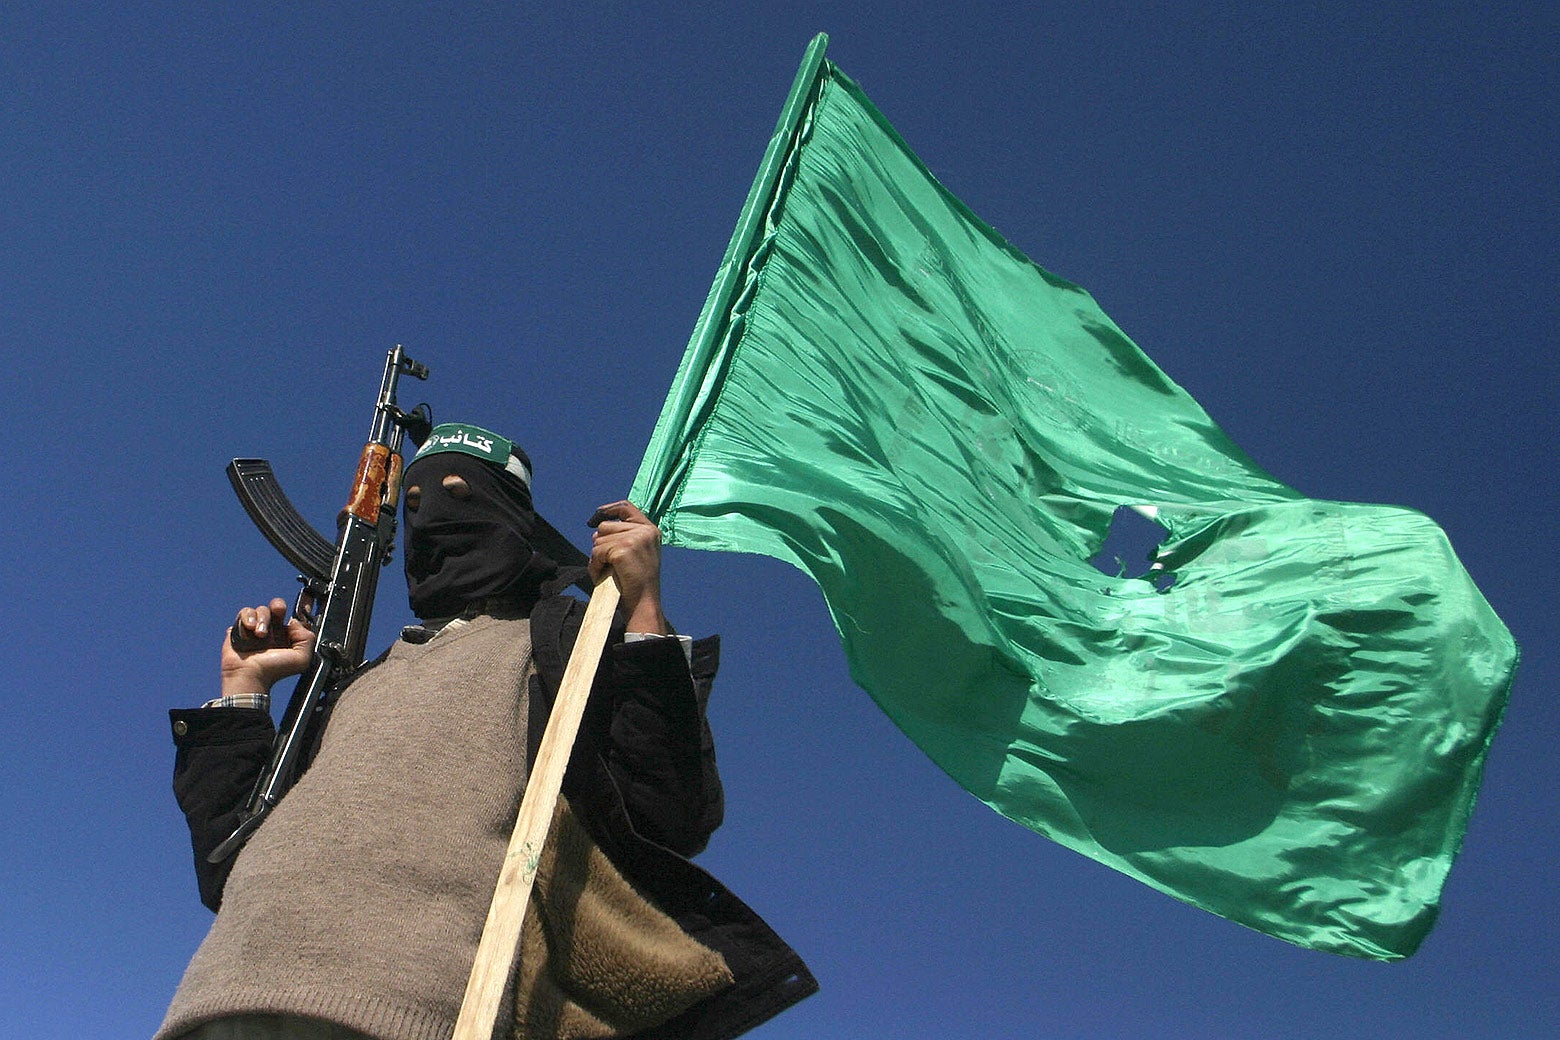 A person with their face covered with a black cloth and wearing a green headband holds a gun in one hand and a green flag in the other.